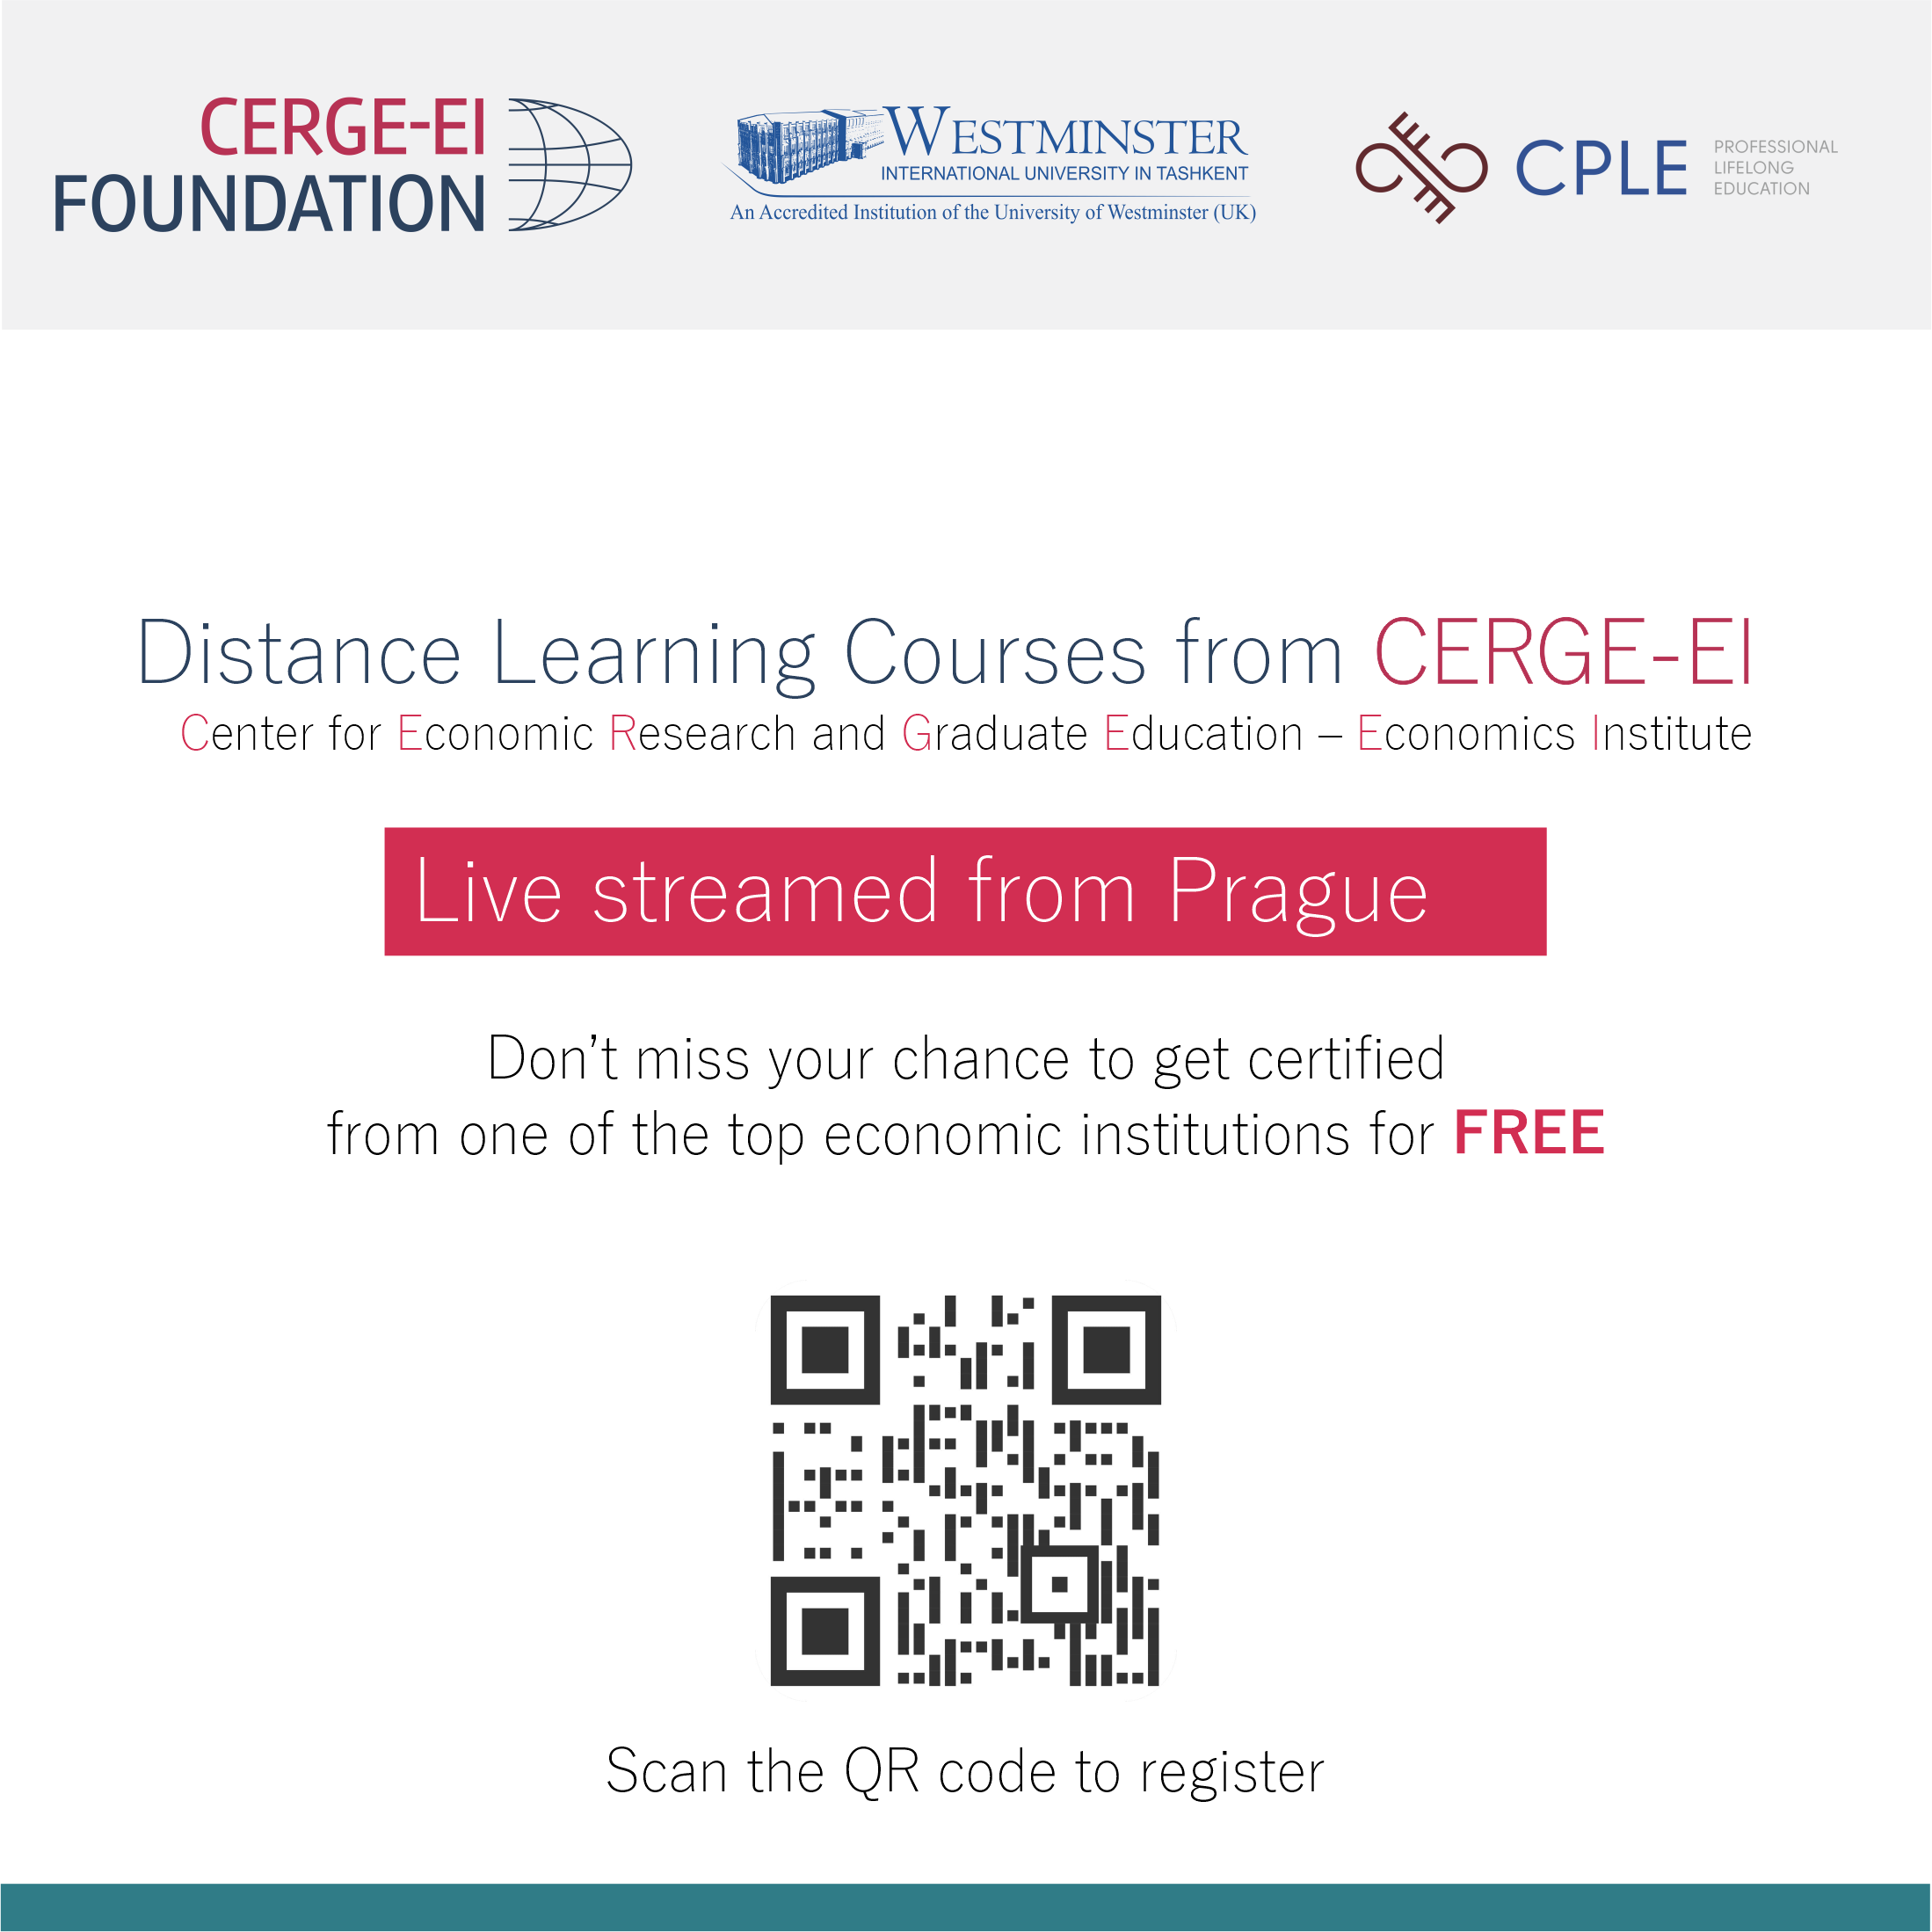 Participate in the CERGE-EI Foundation Distance Learning Program 2021.